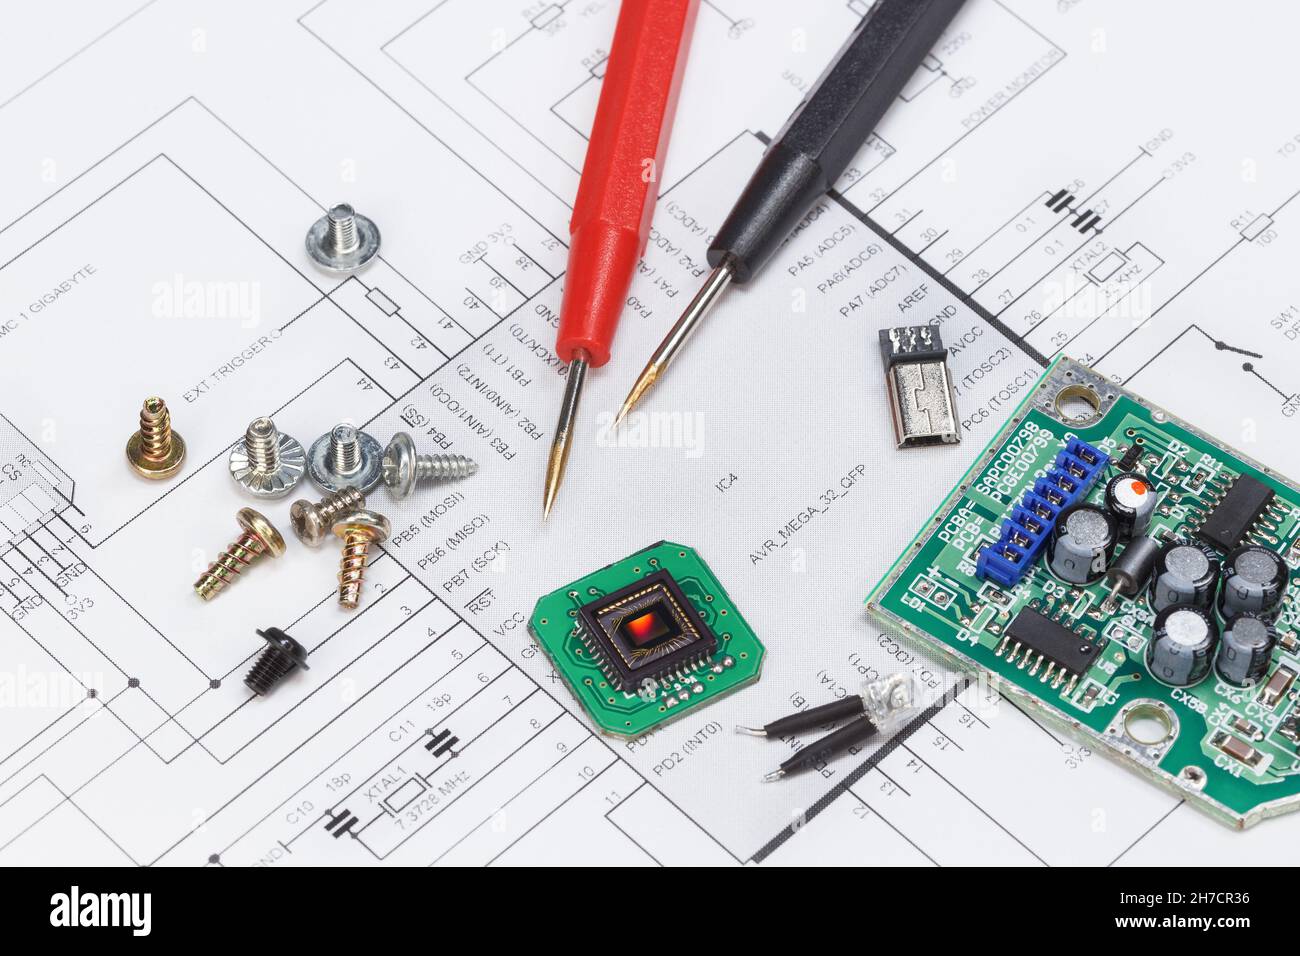 Diagram of an electronic device and lying on it, electronic modules, bolts, and parts Stock Photo